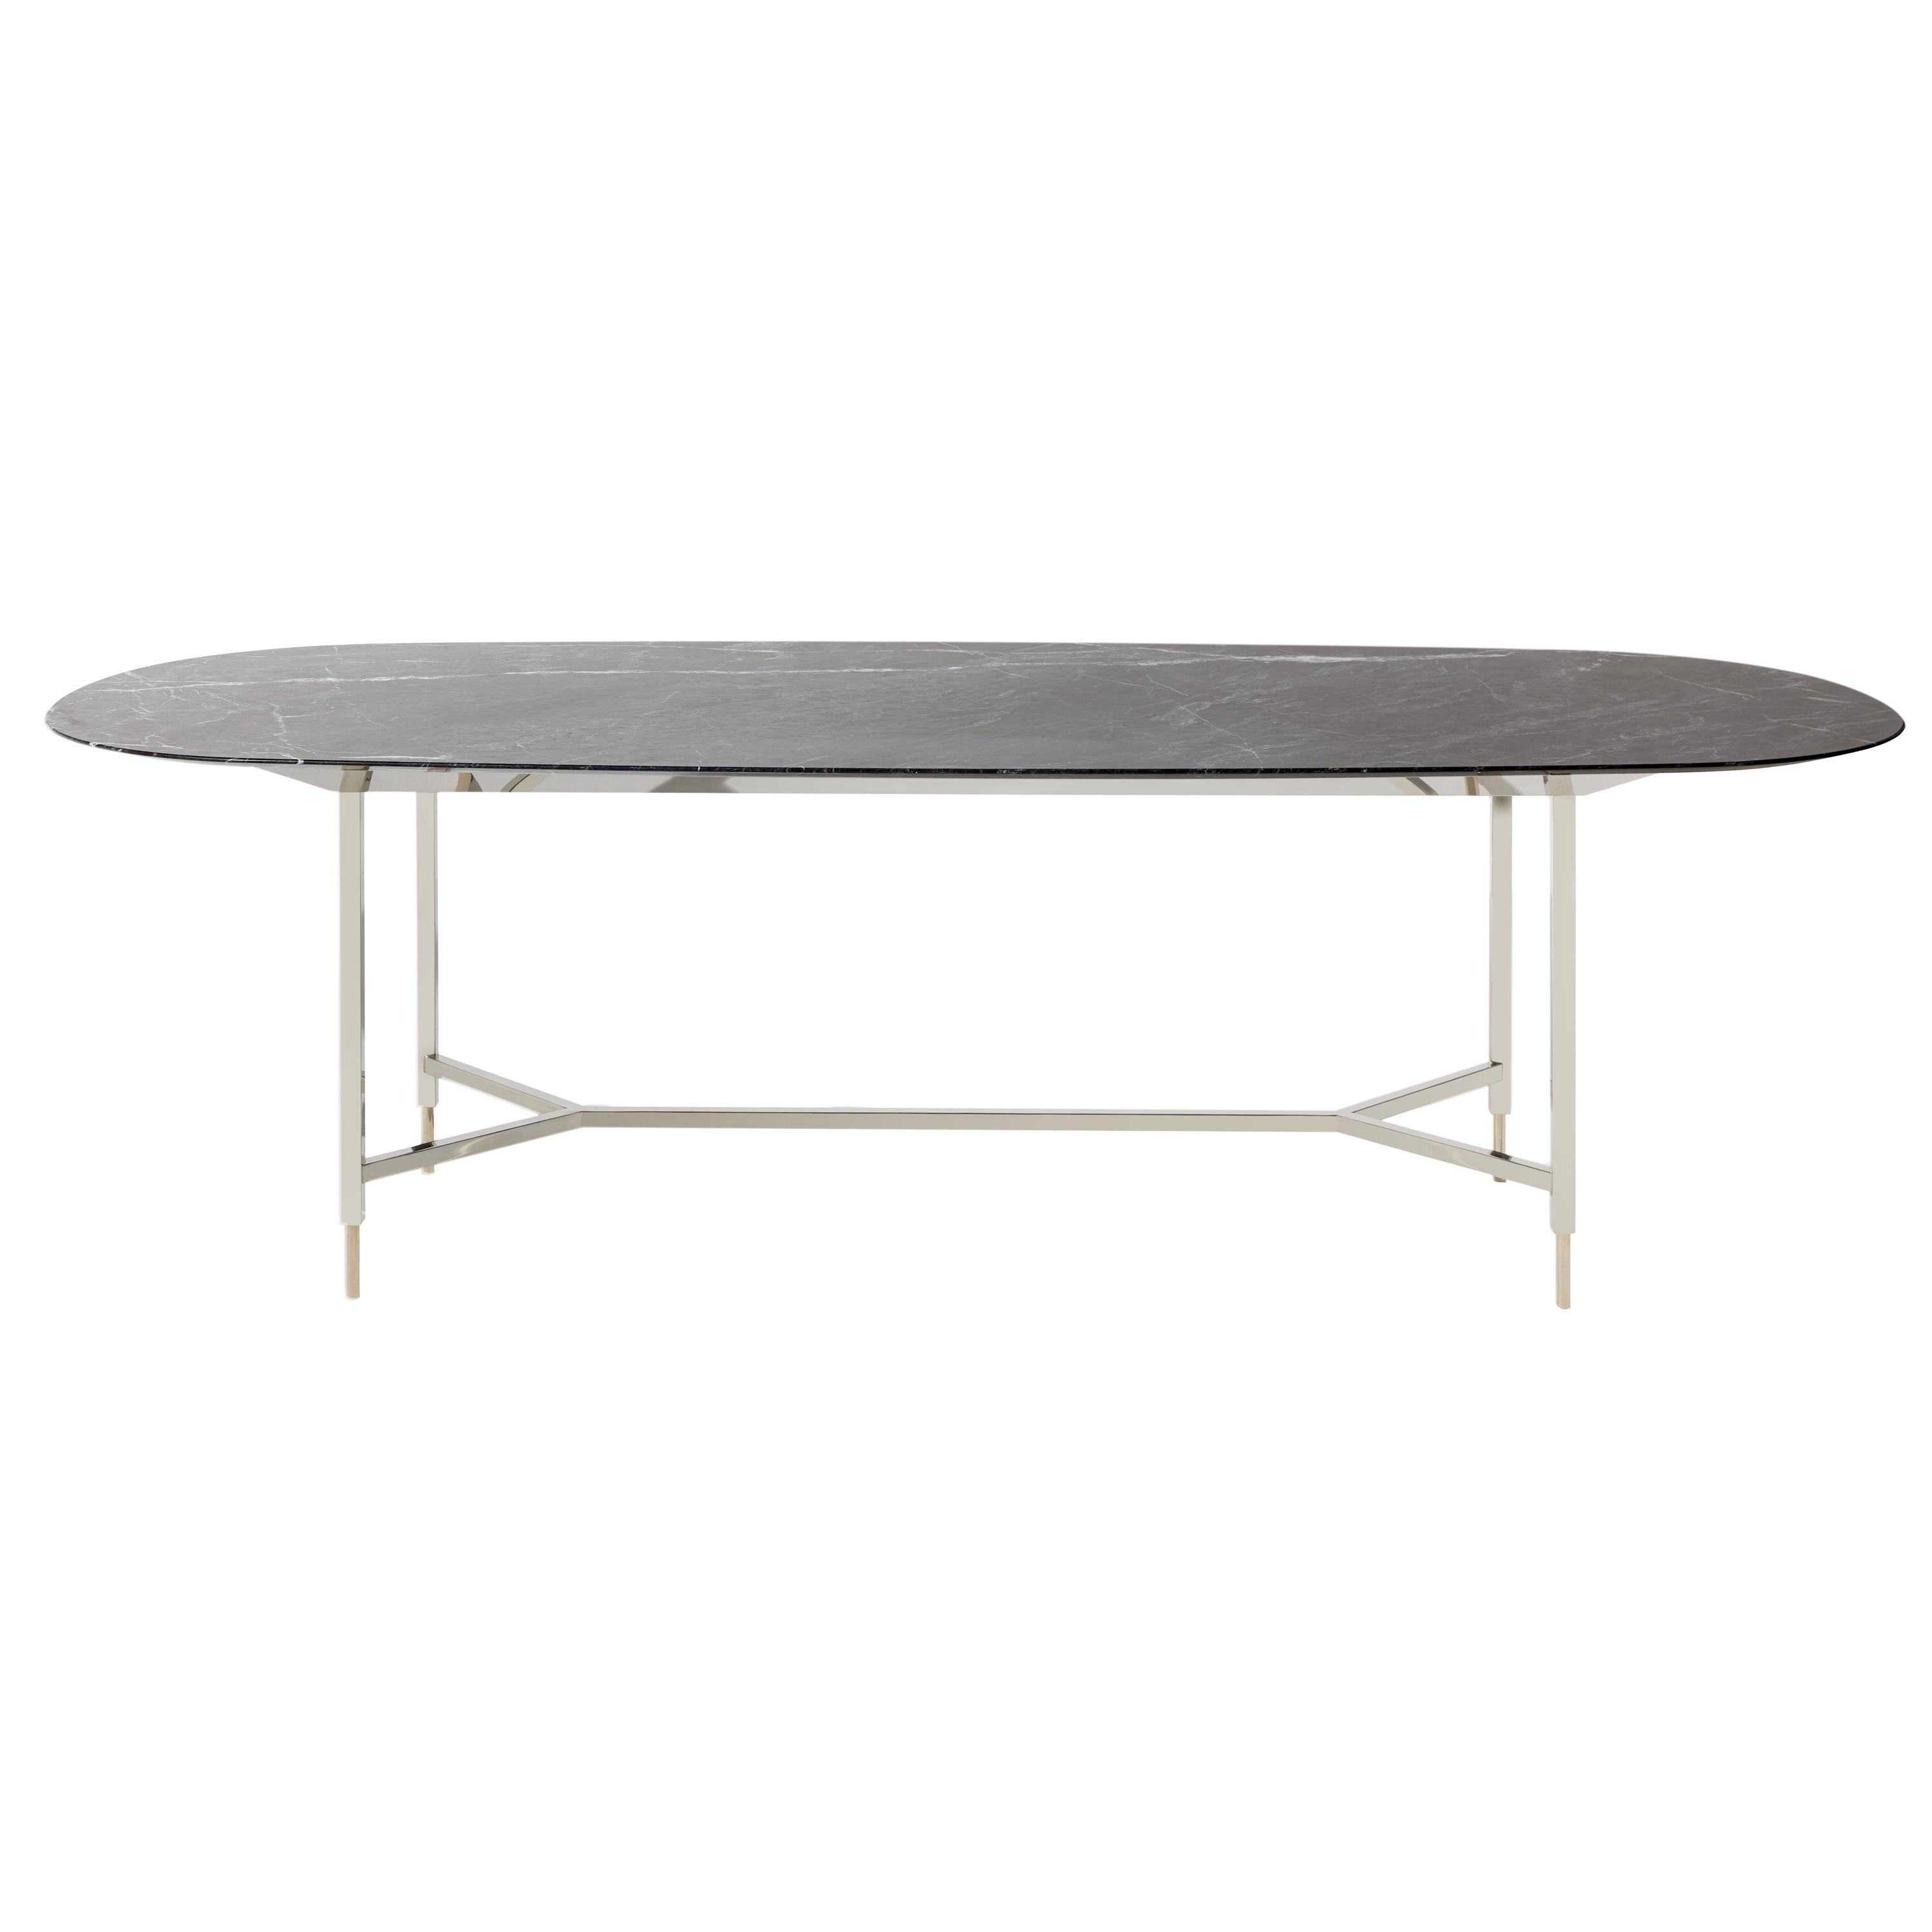 Banquet Table, Top Carnic Grey Marble, Structure Steel, Finishes Nichel, Gold For Sale